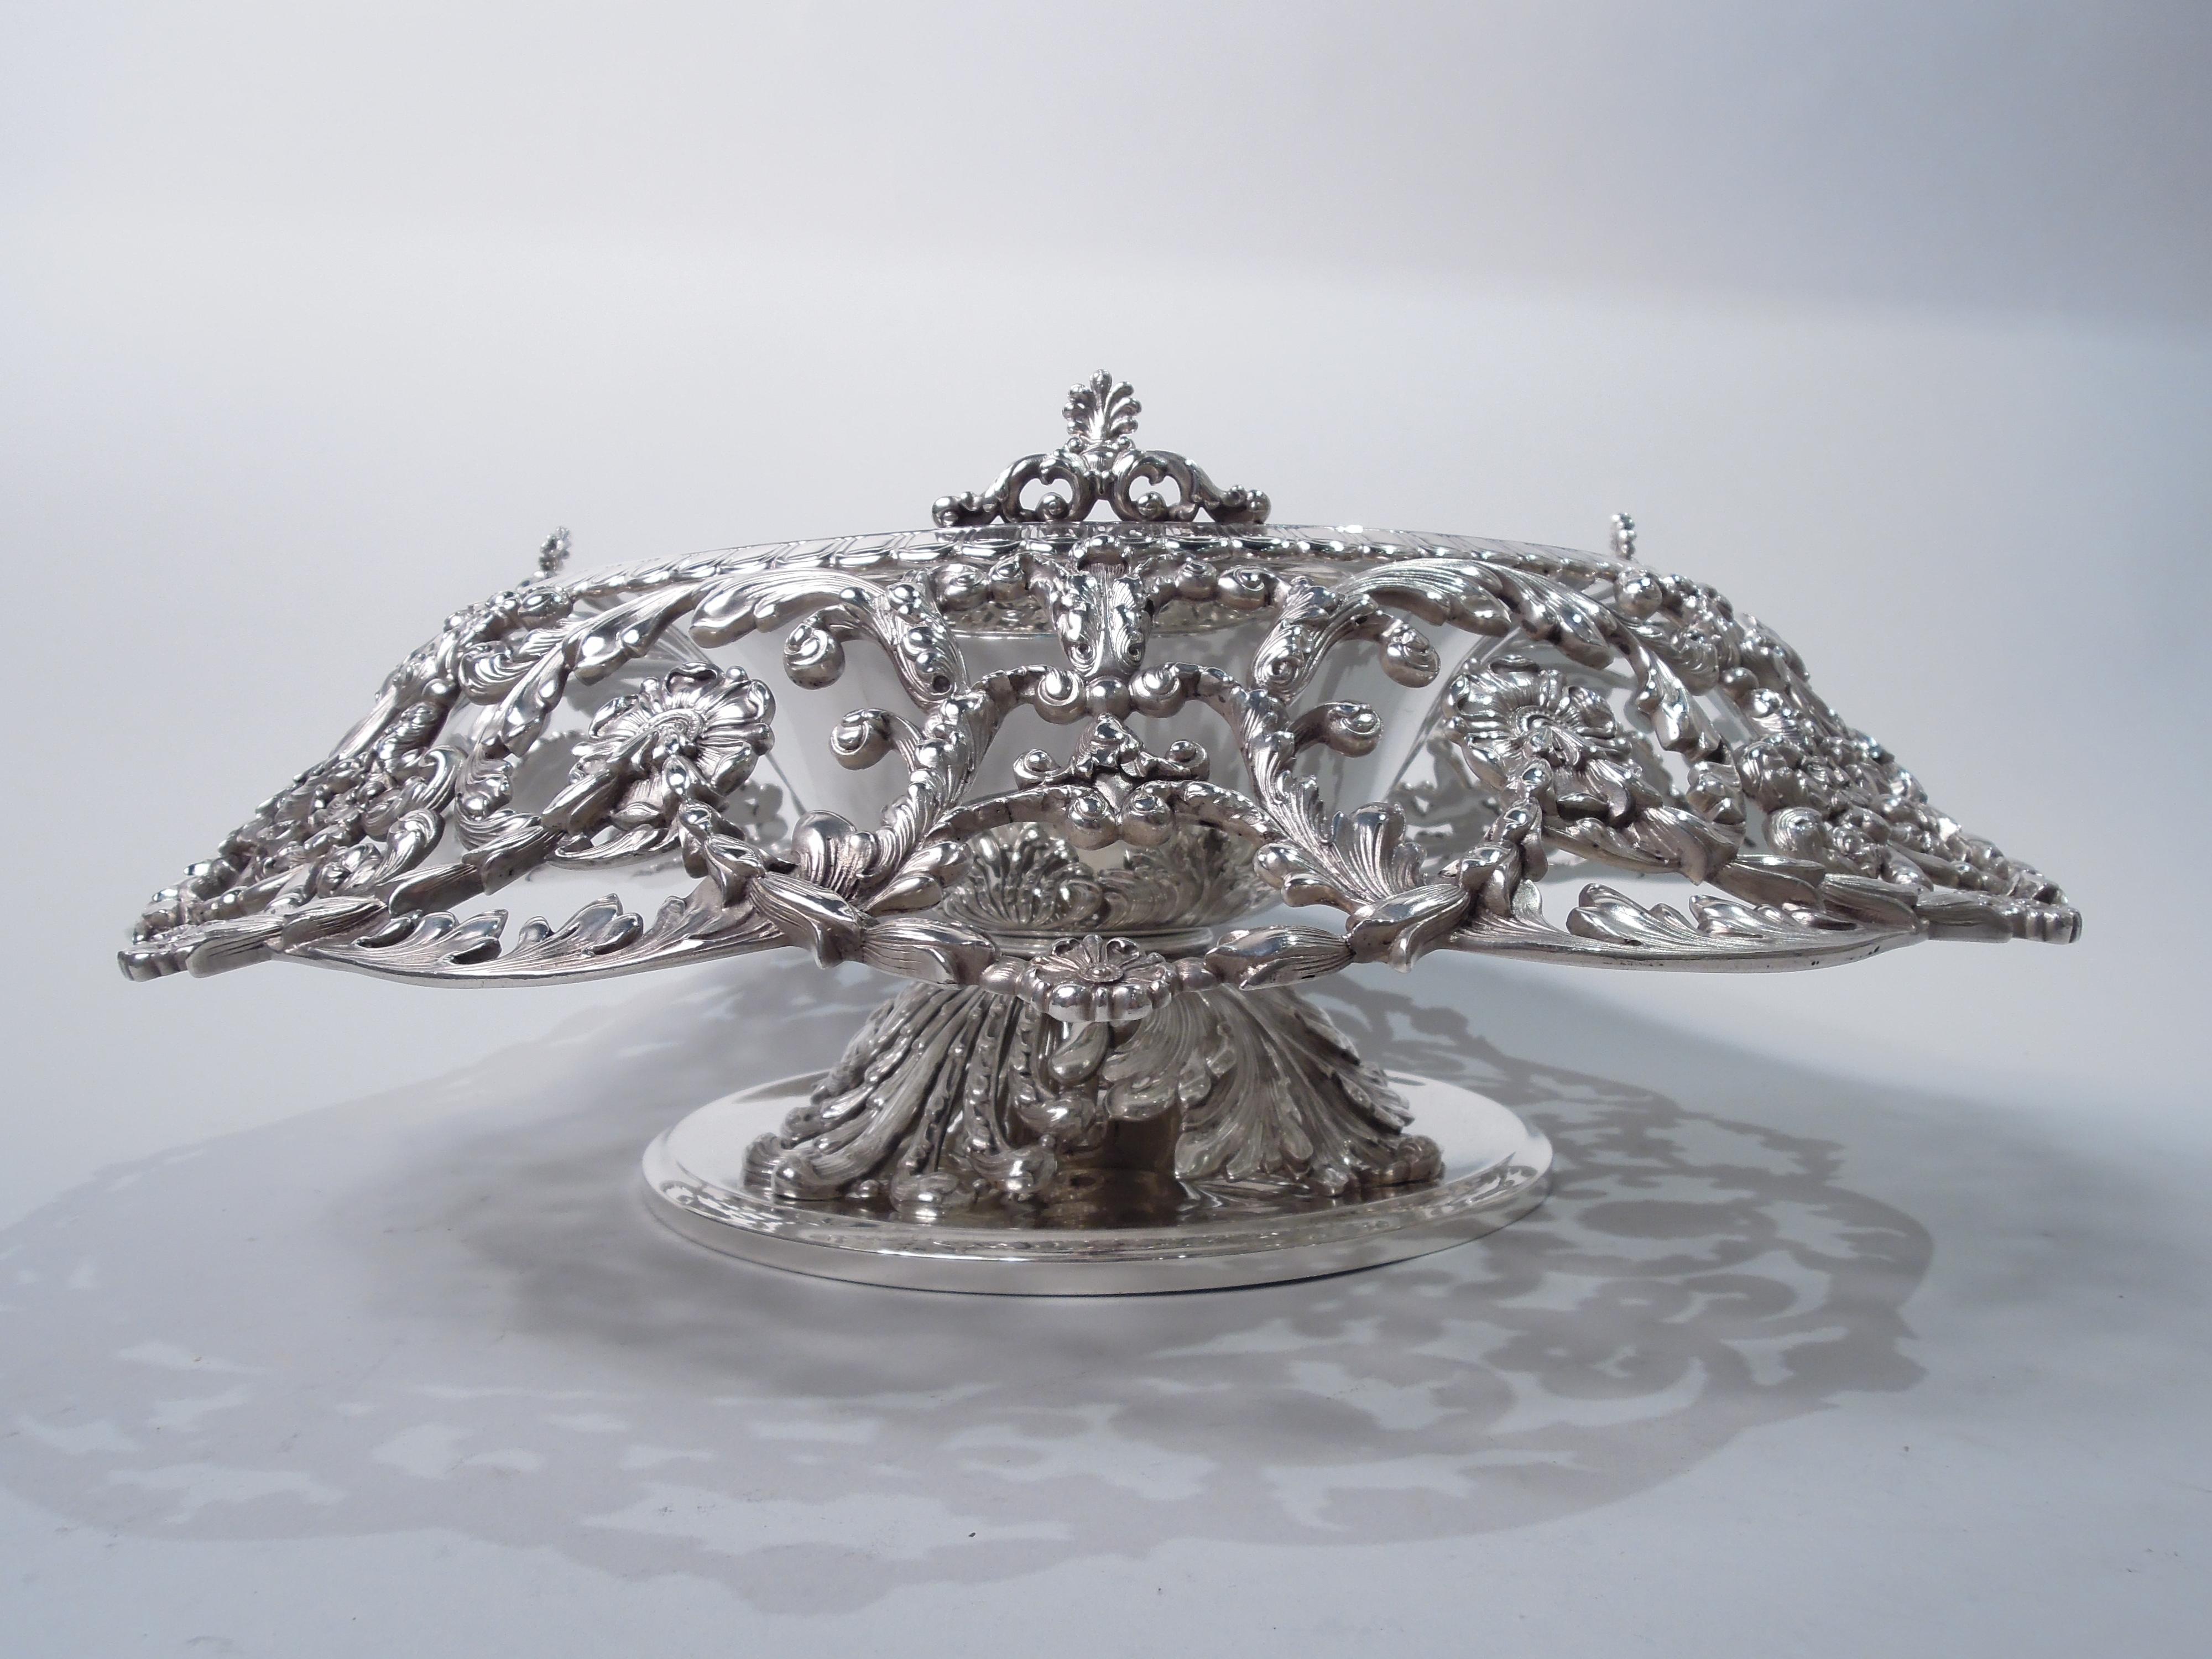 American Sumptuous Tiffany Edwardian Classical Sterling Silver Centerpiece Bowl For Sale